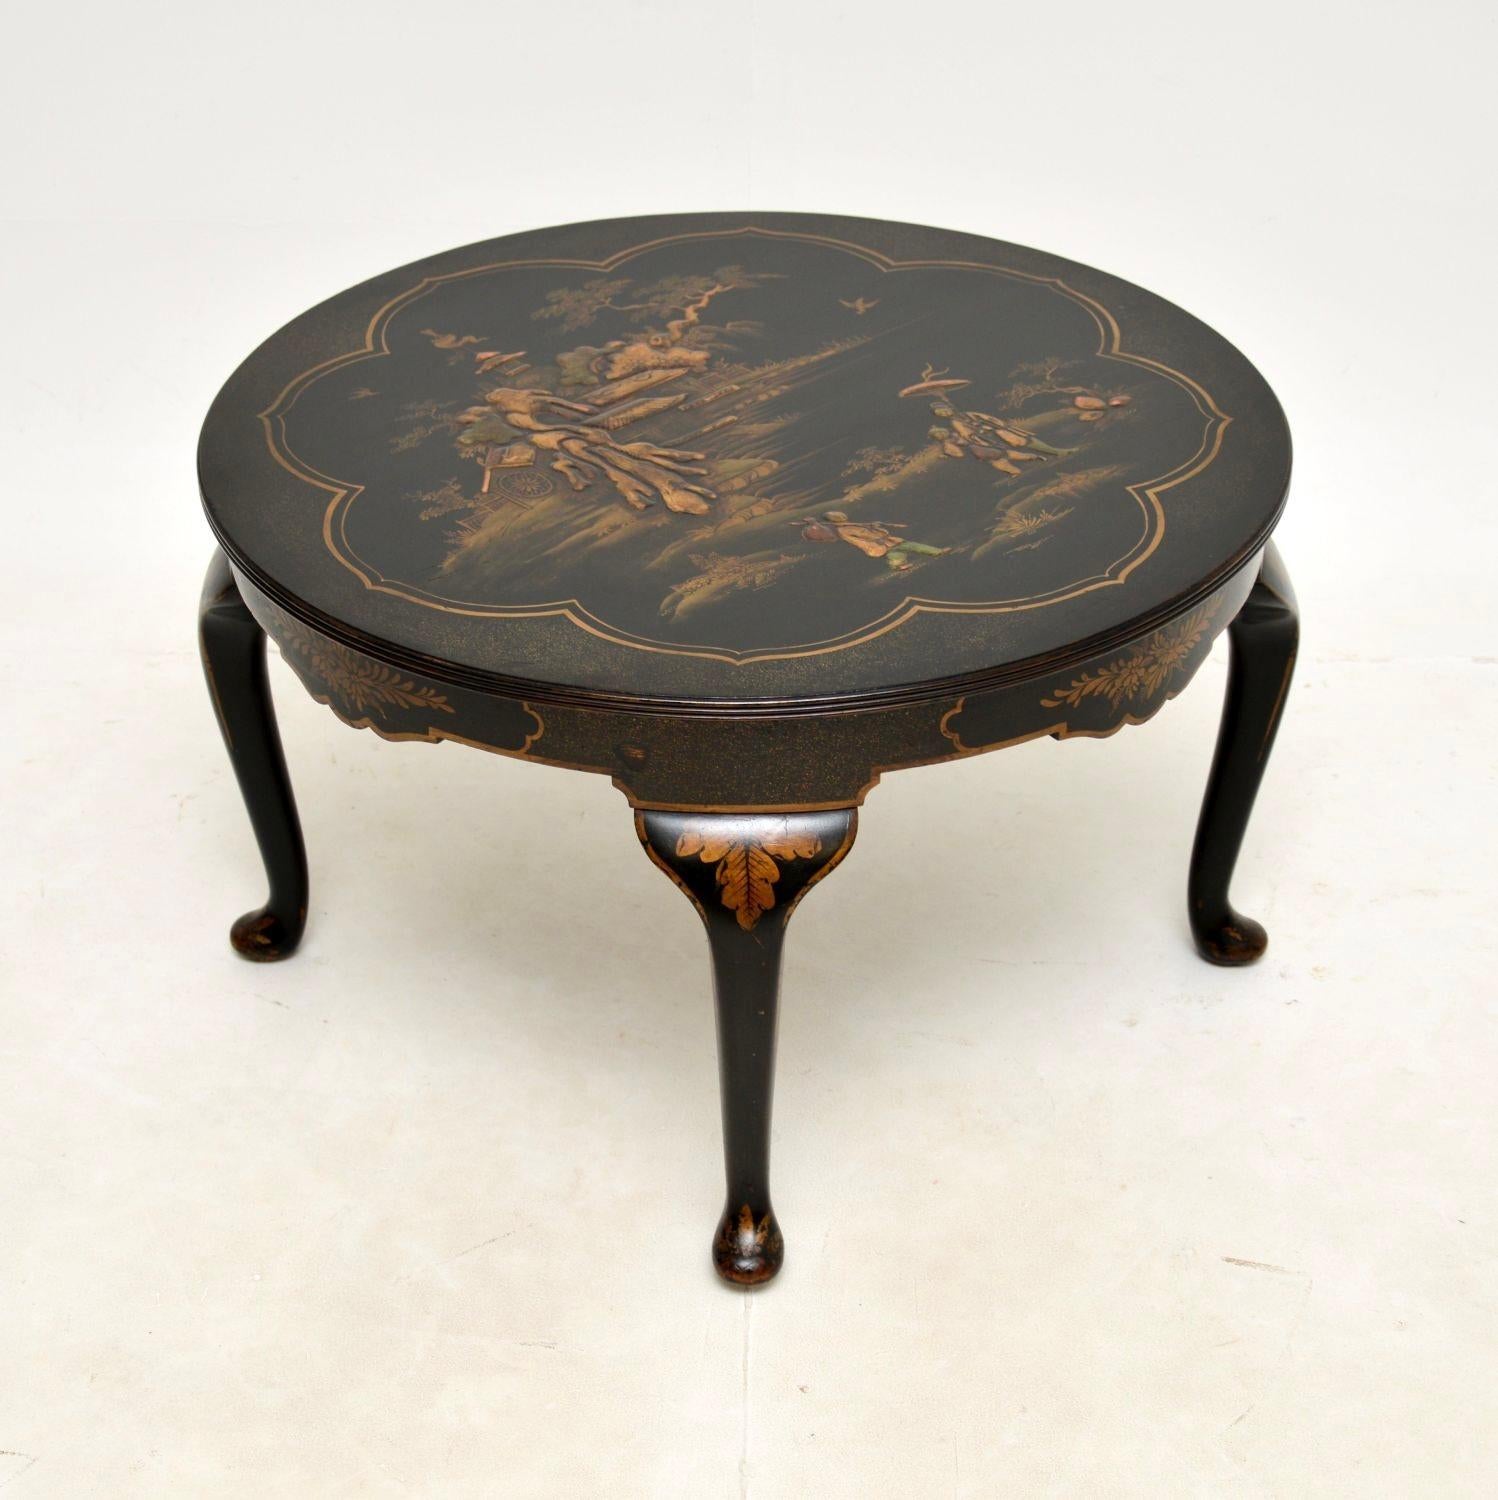 Chinoiseries Table basse chinoiserie laquée ancienne en vente